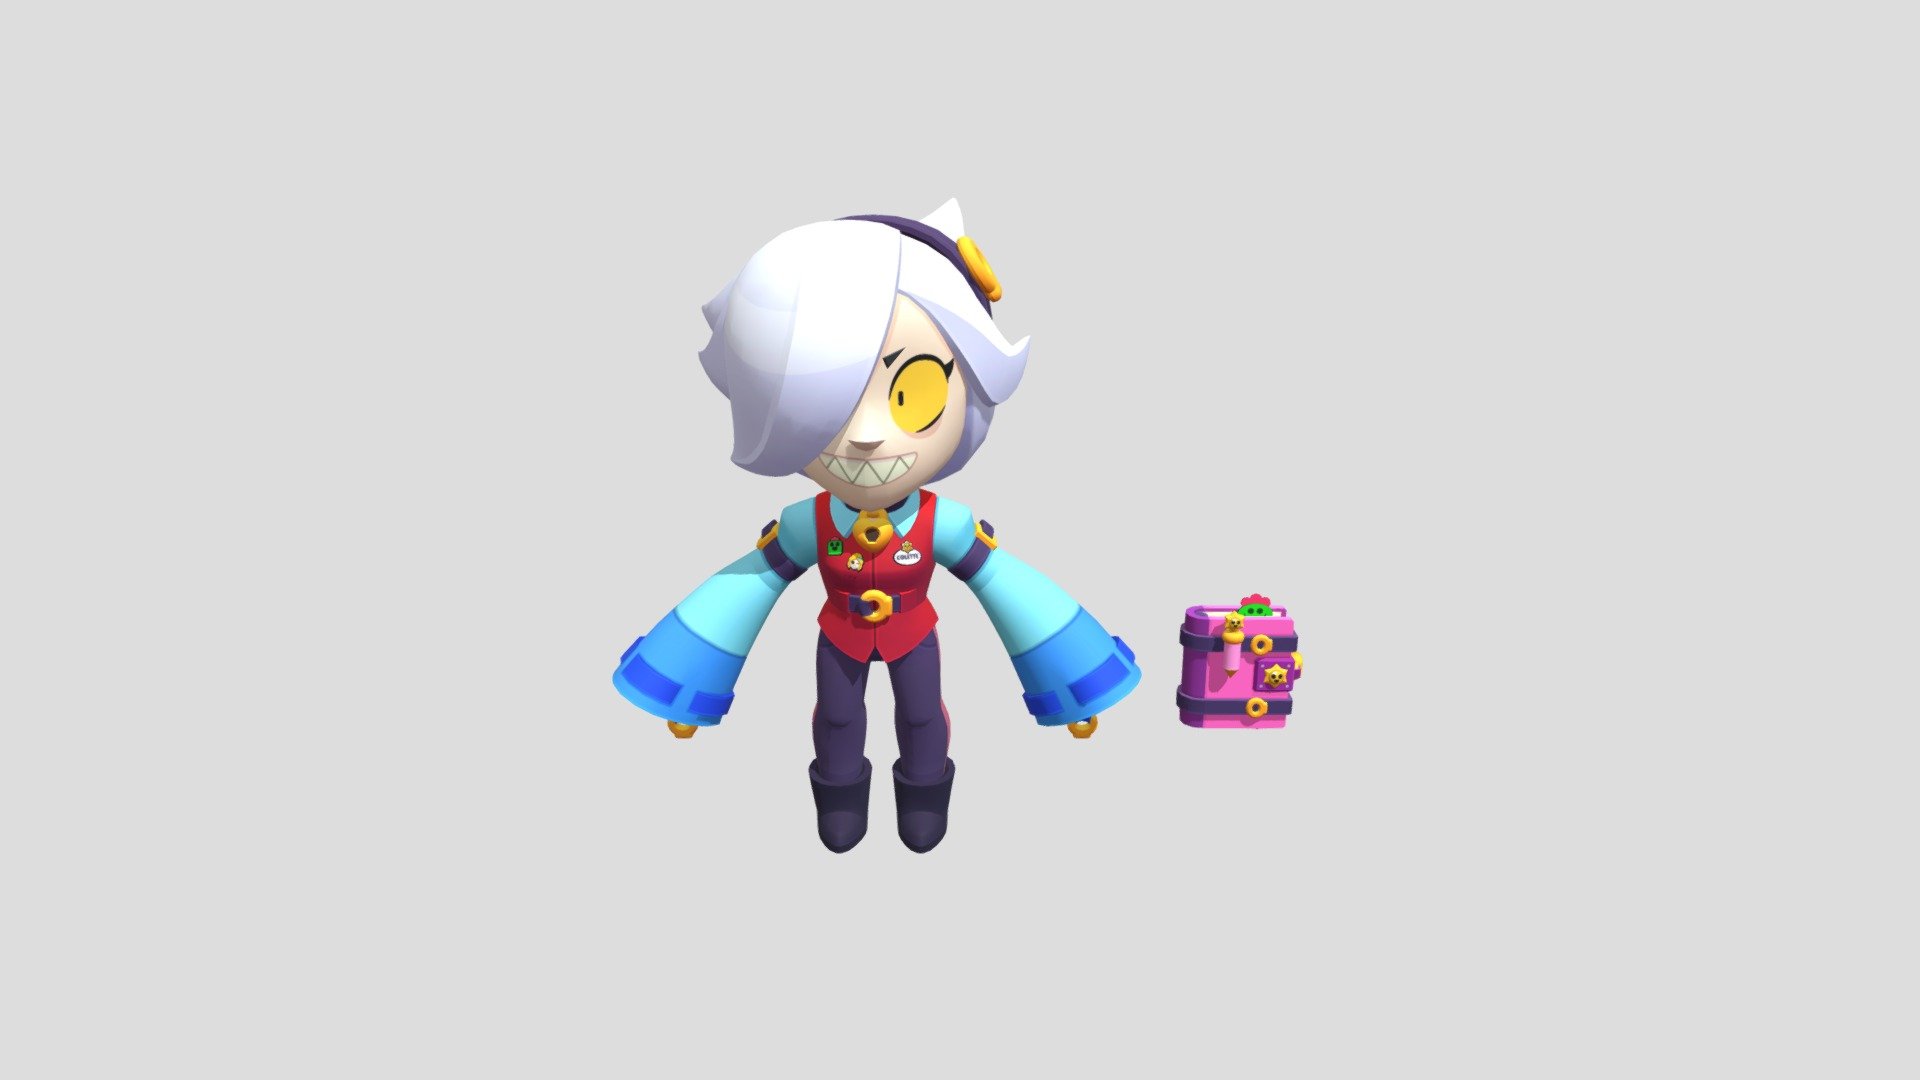 Colette Brawl Stars Download Free 3d Model By Onilak24 Onilak F99cfb9 - brawl stars 3d models download